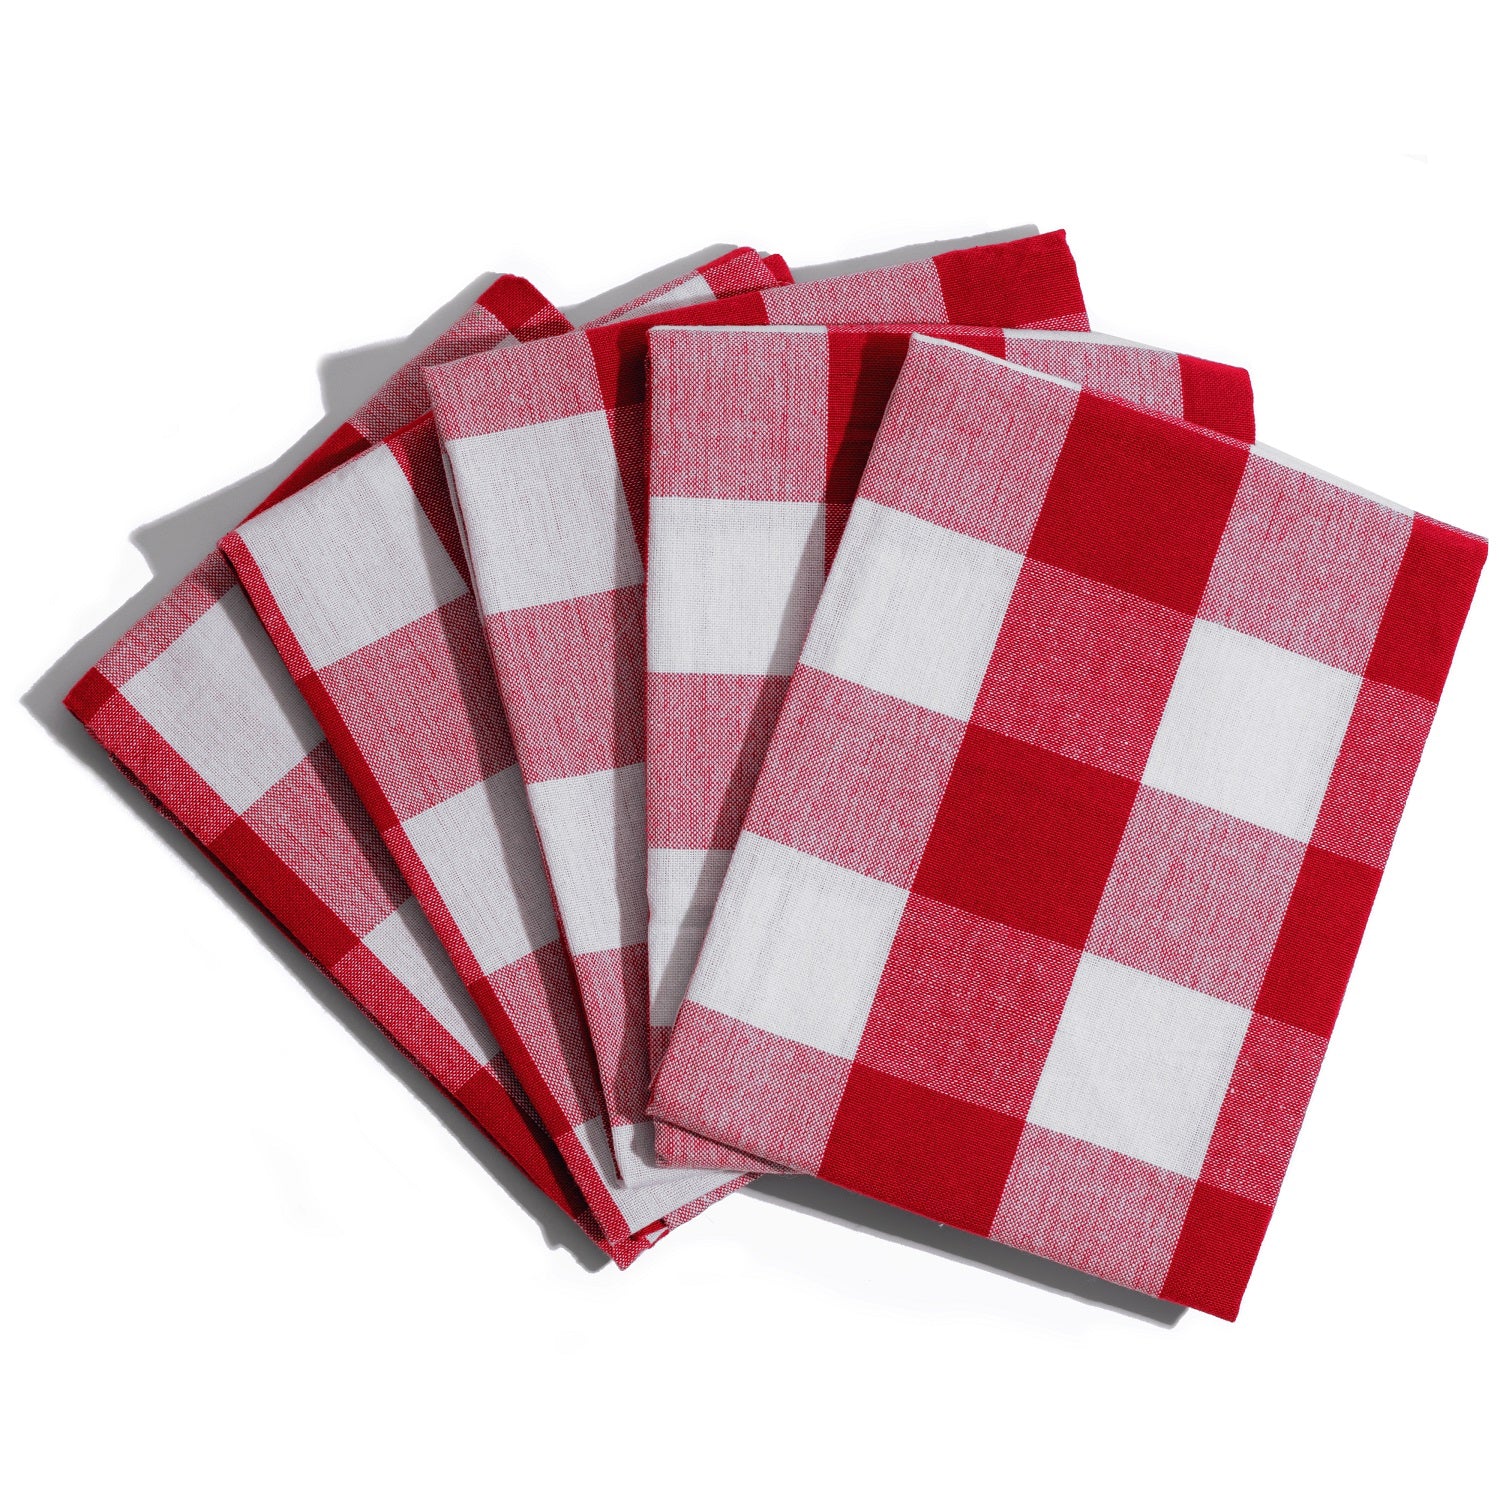 Buy Wholesale China Kitchen Towels Tea Towels, 20 X 26 Inches